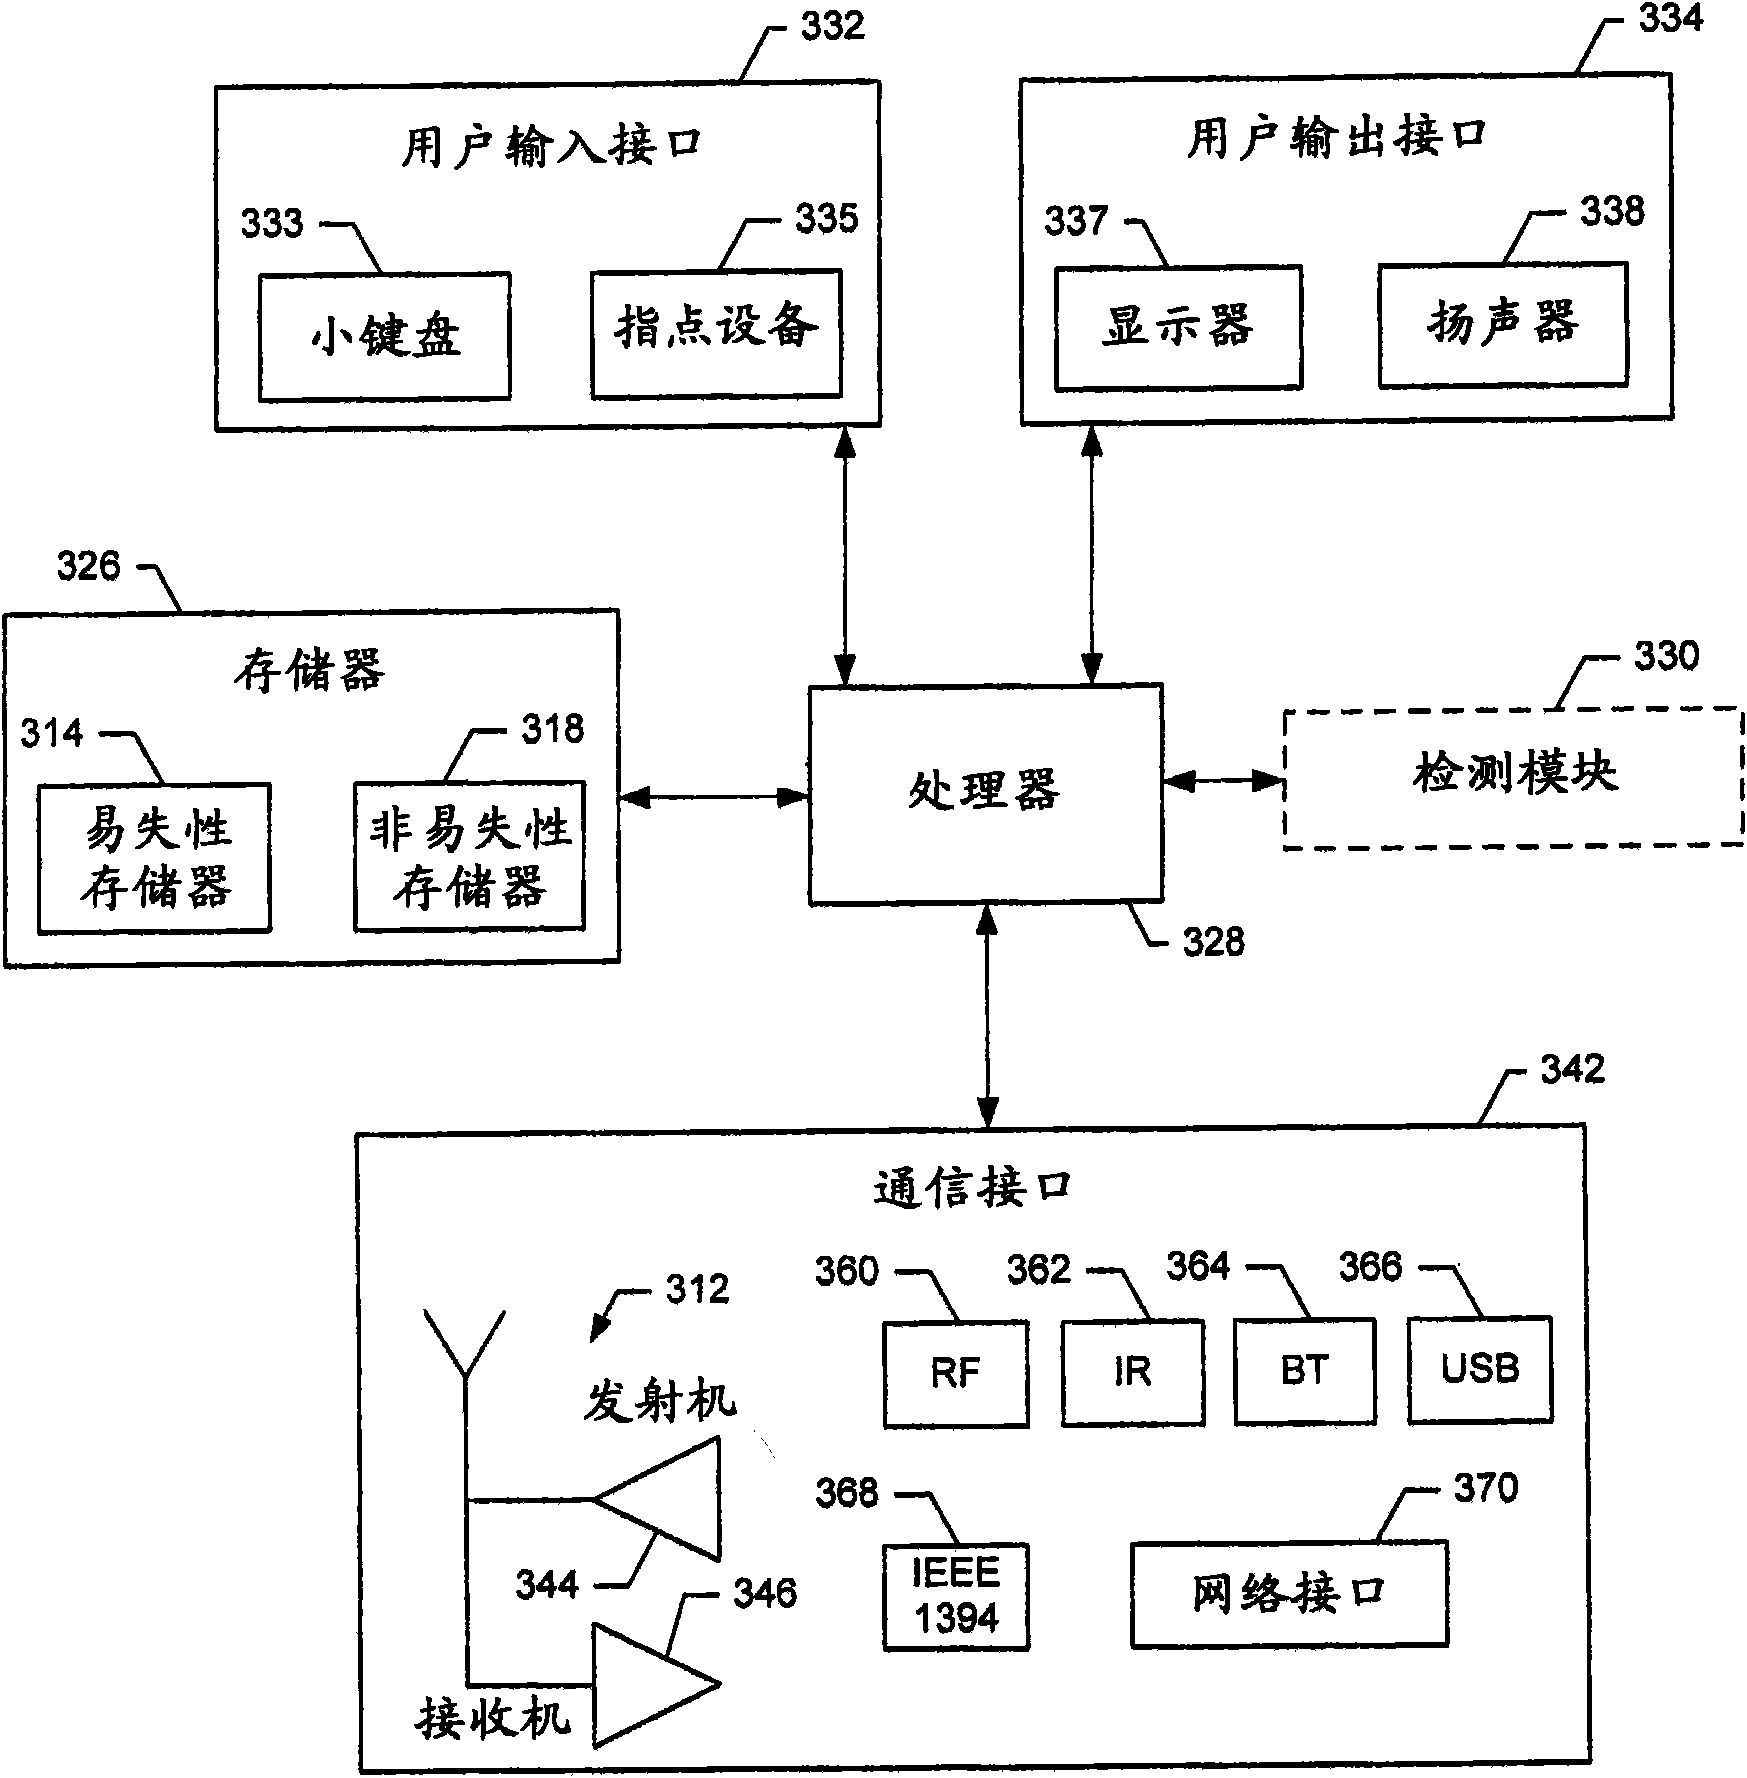 Detection of UTF-16 encoding in streaming XML data without a byte-order mark and related printers, systems, methods, and computer program products